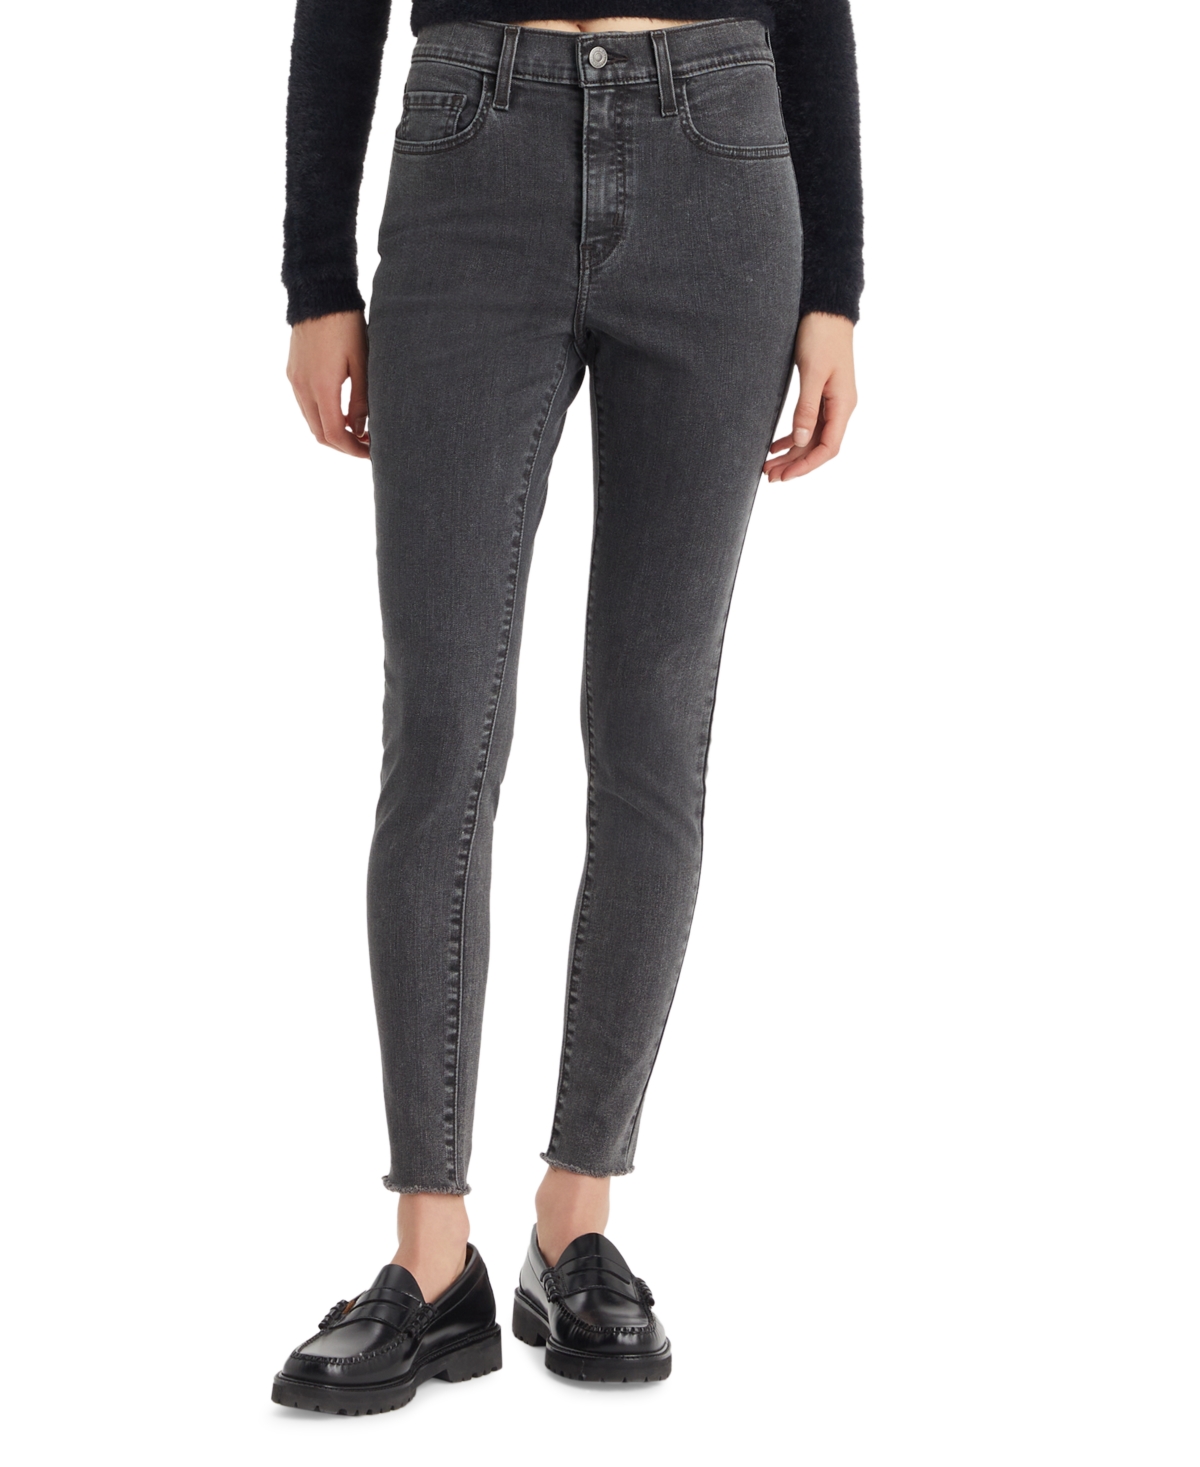 Women's 720 High-Rise Stretchy Super-Skinny Jeans - Its Your Time